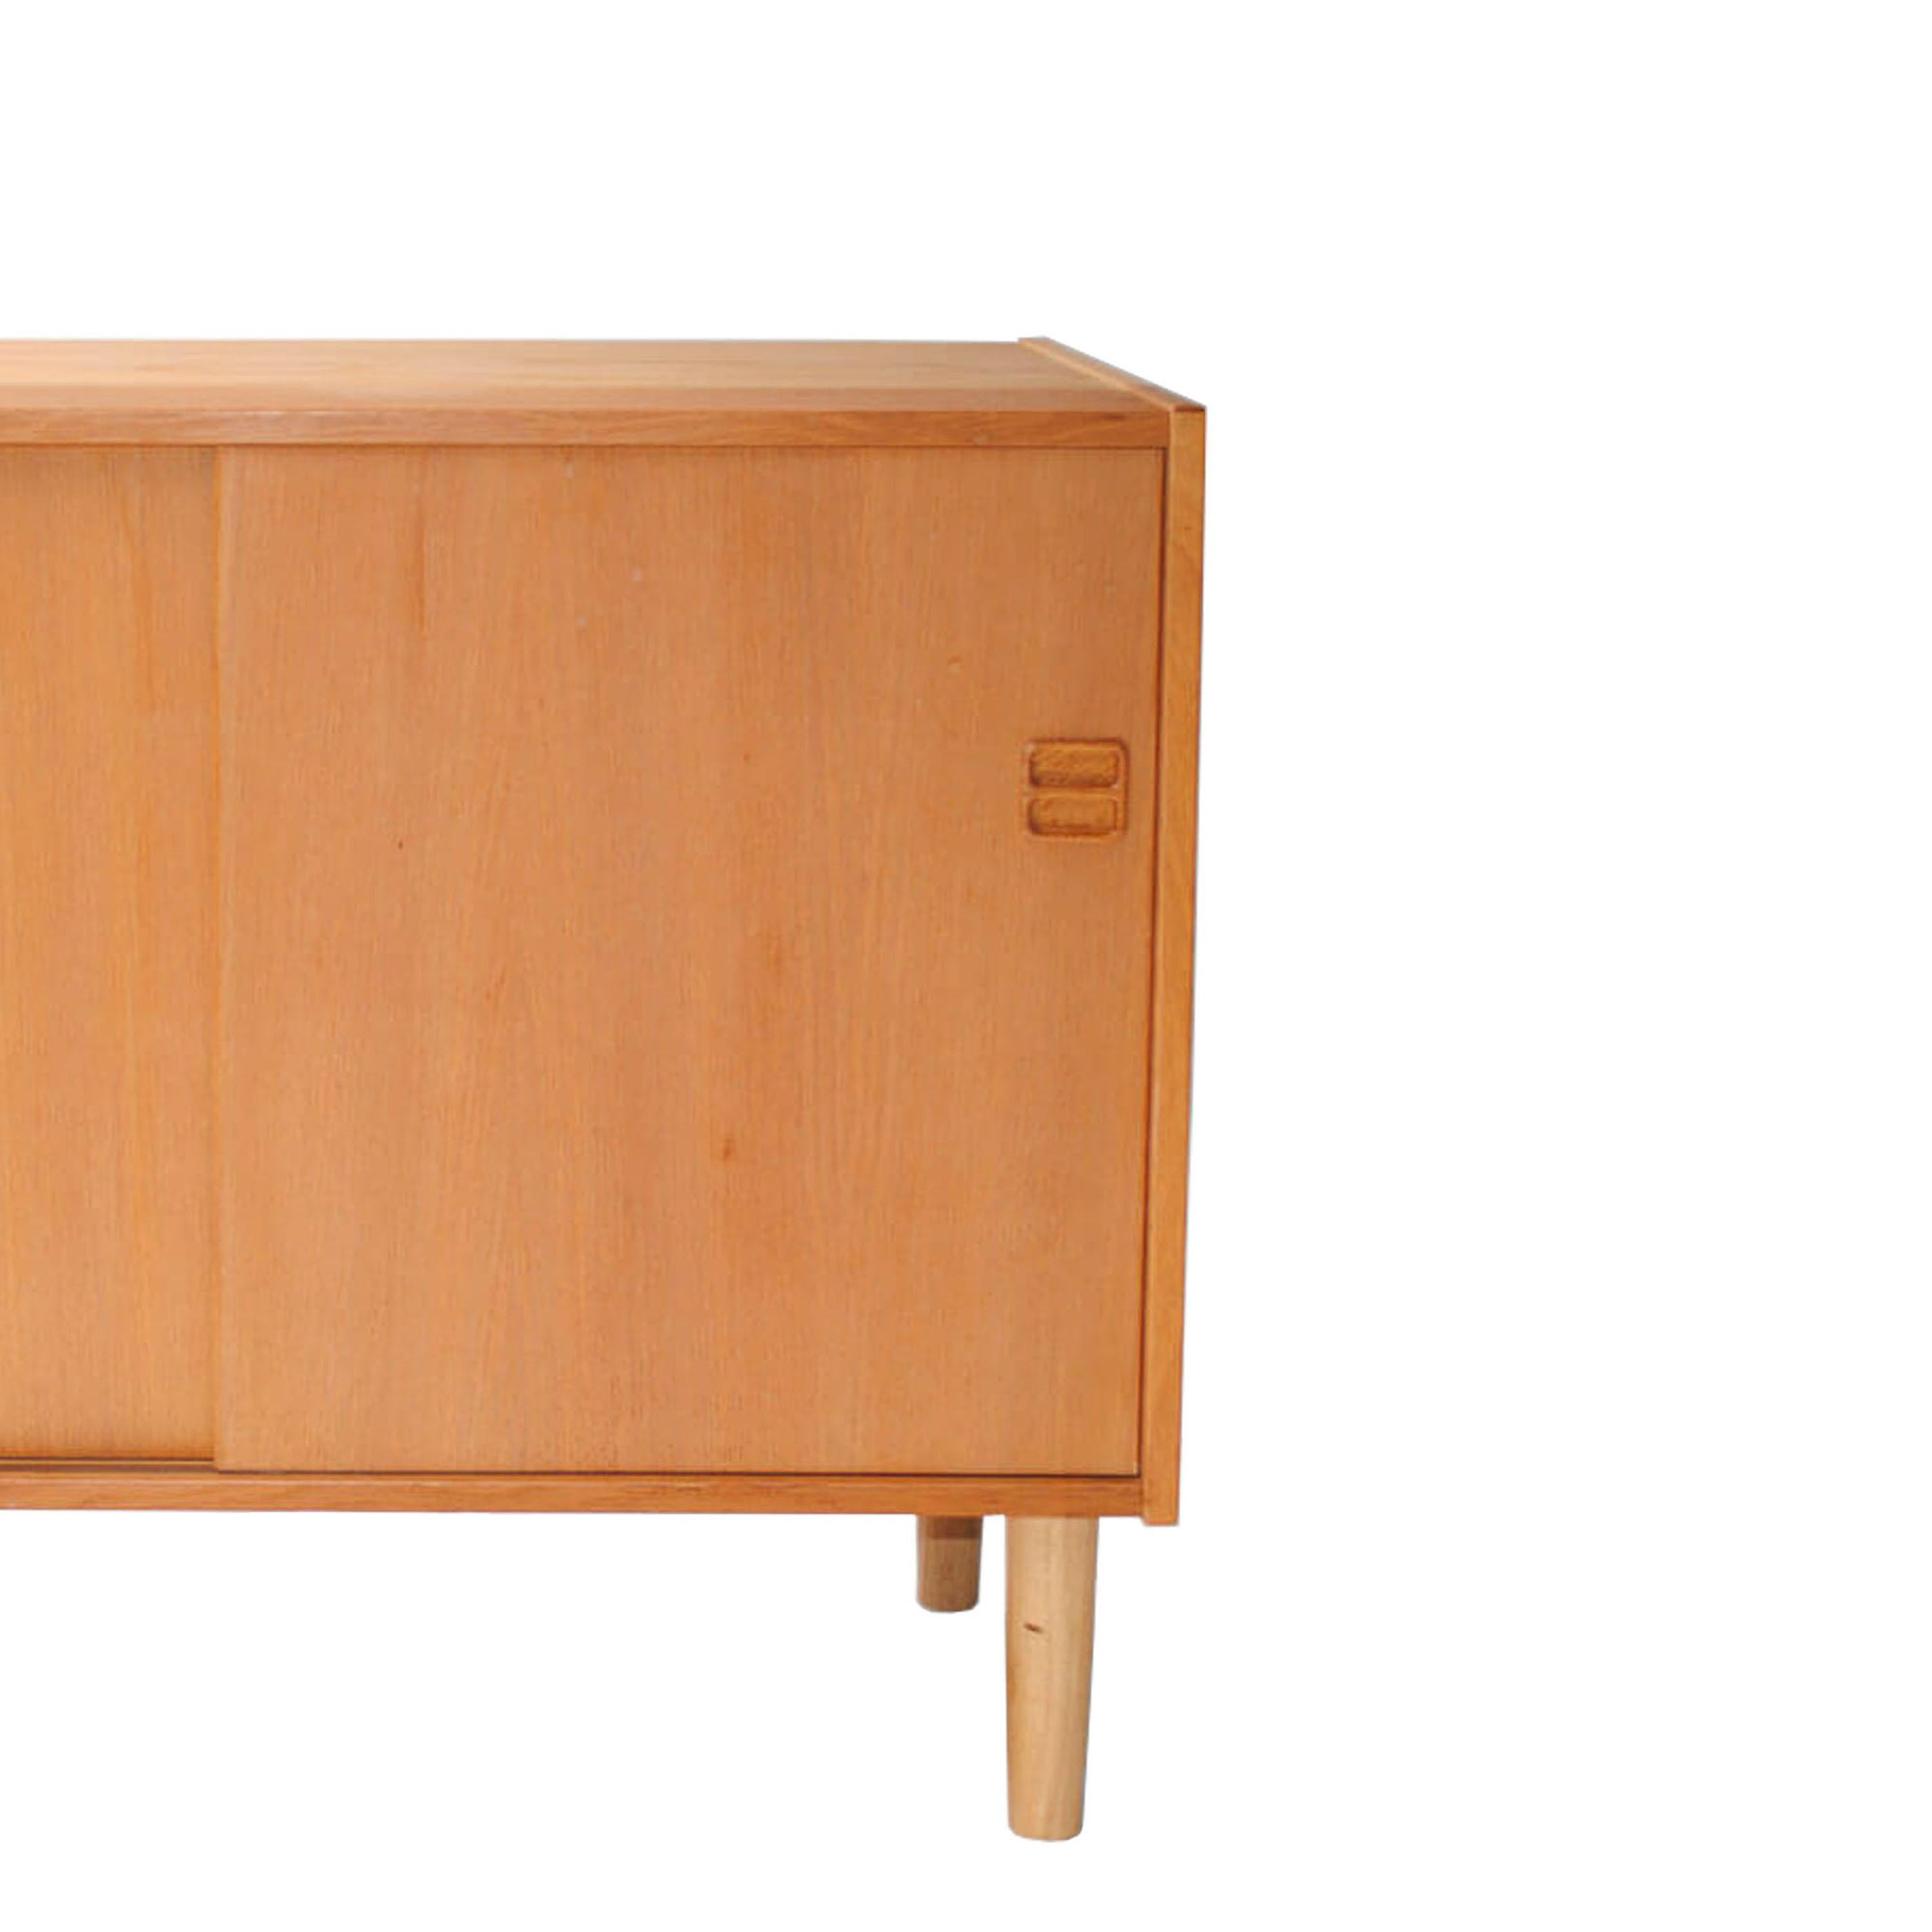 Sideboard with oak structure, three drawers and rectangular handles. Conical legs.